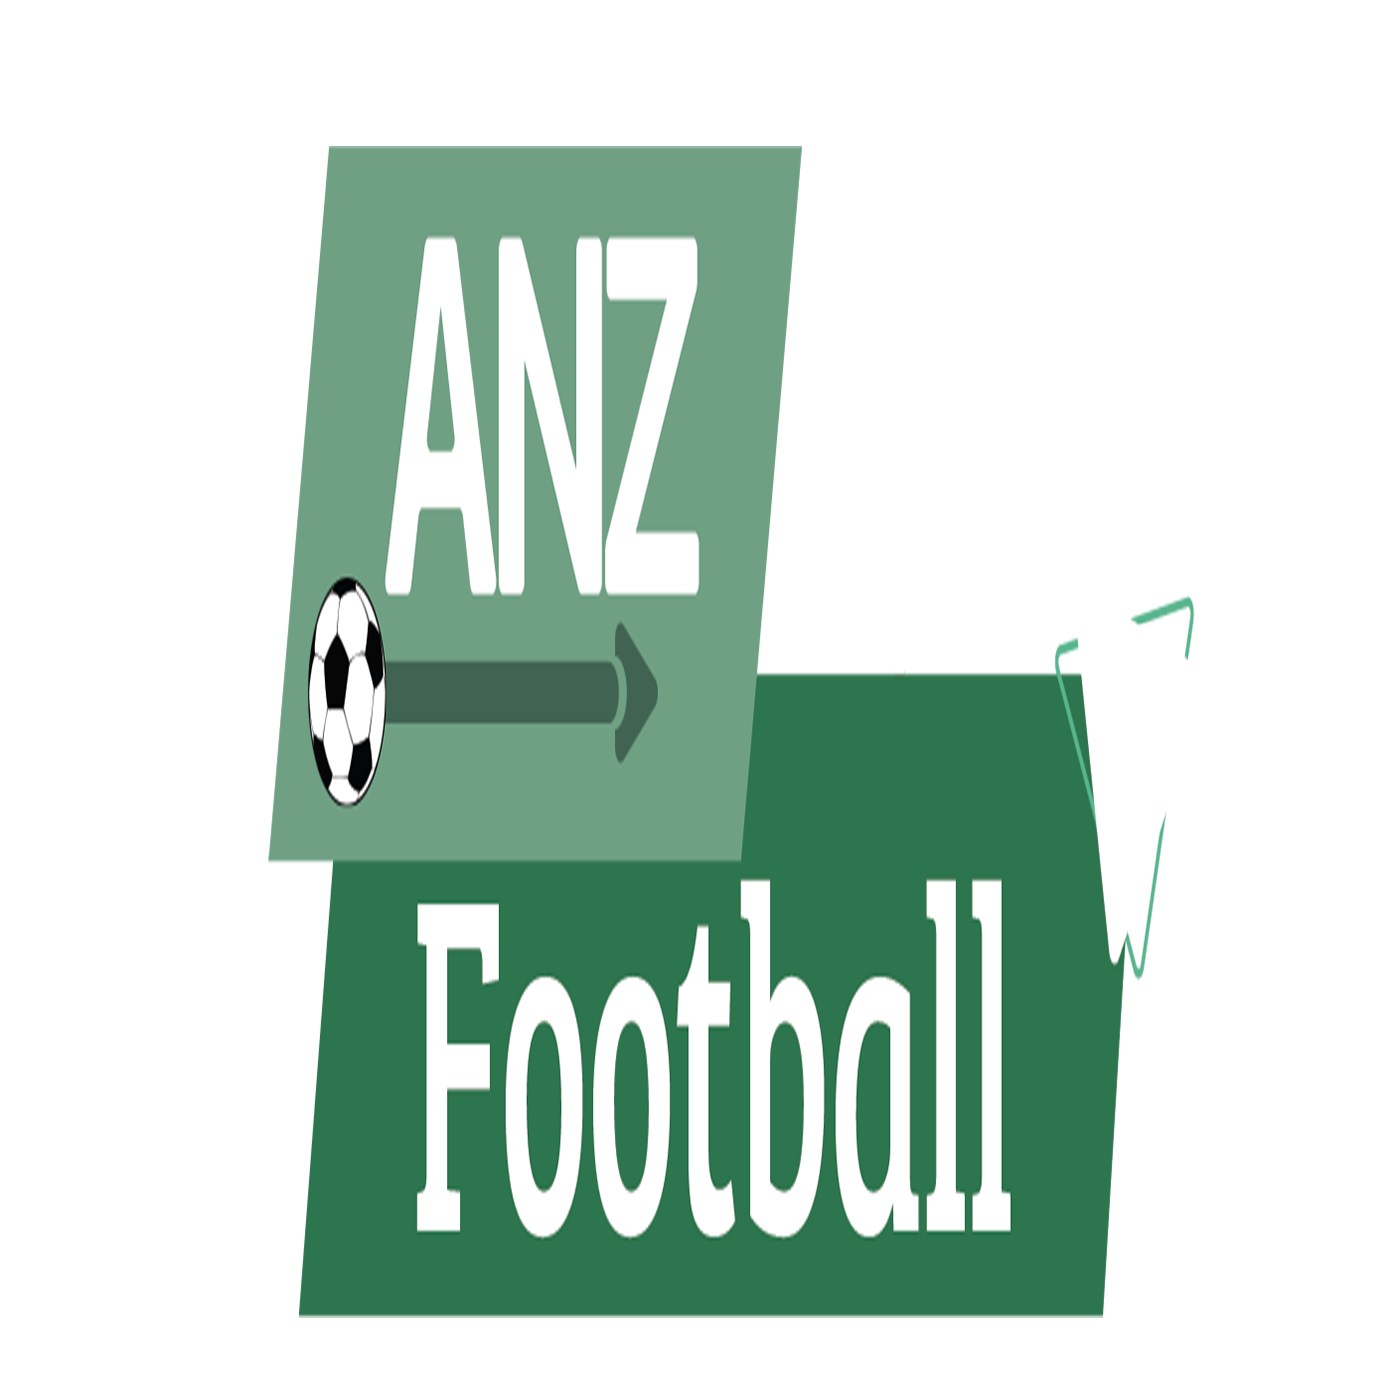 Anzfootball - football streaming site